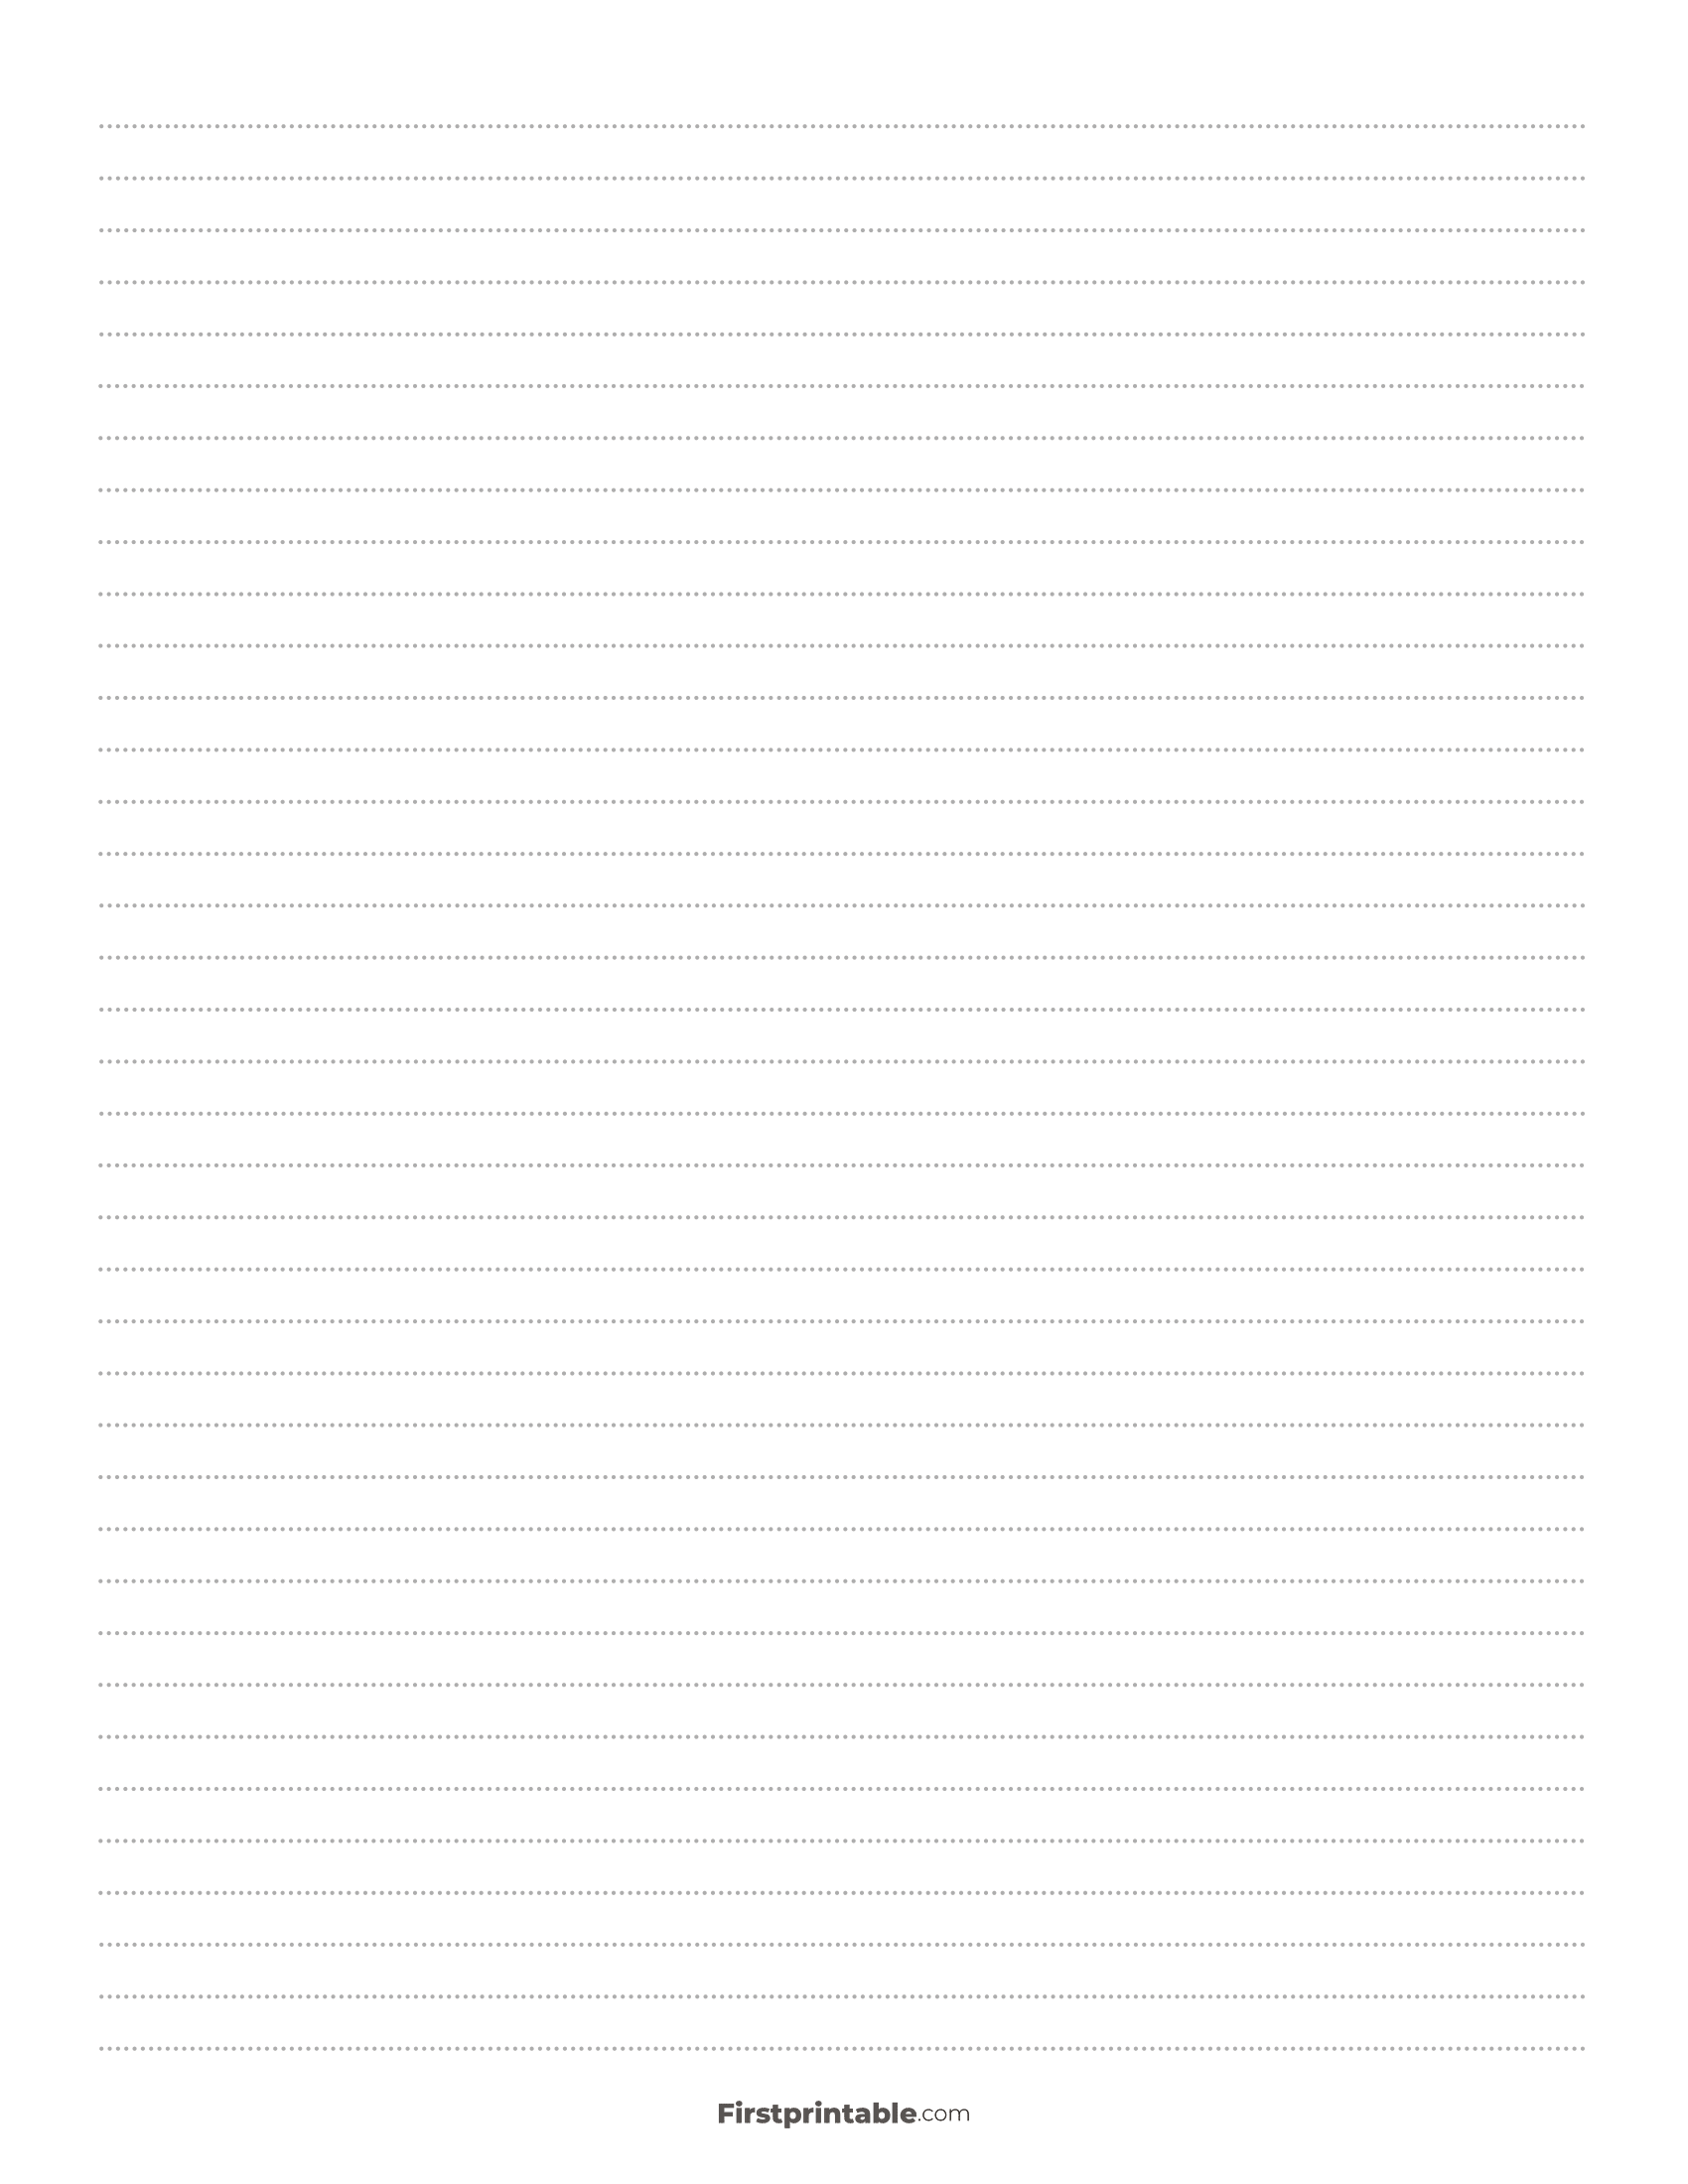 Printable Dotted Lined Paper Template - Narrow Ruled